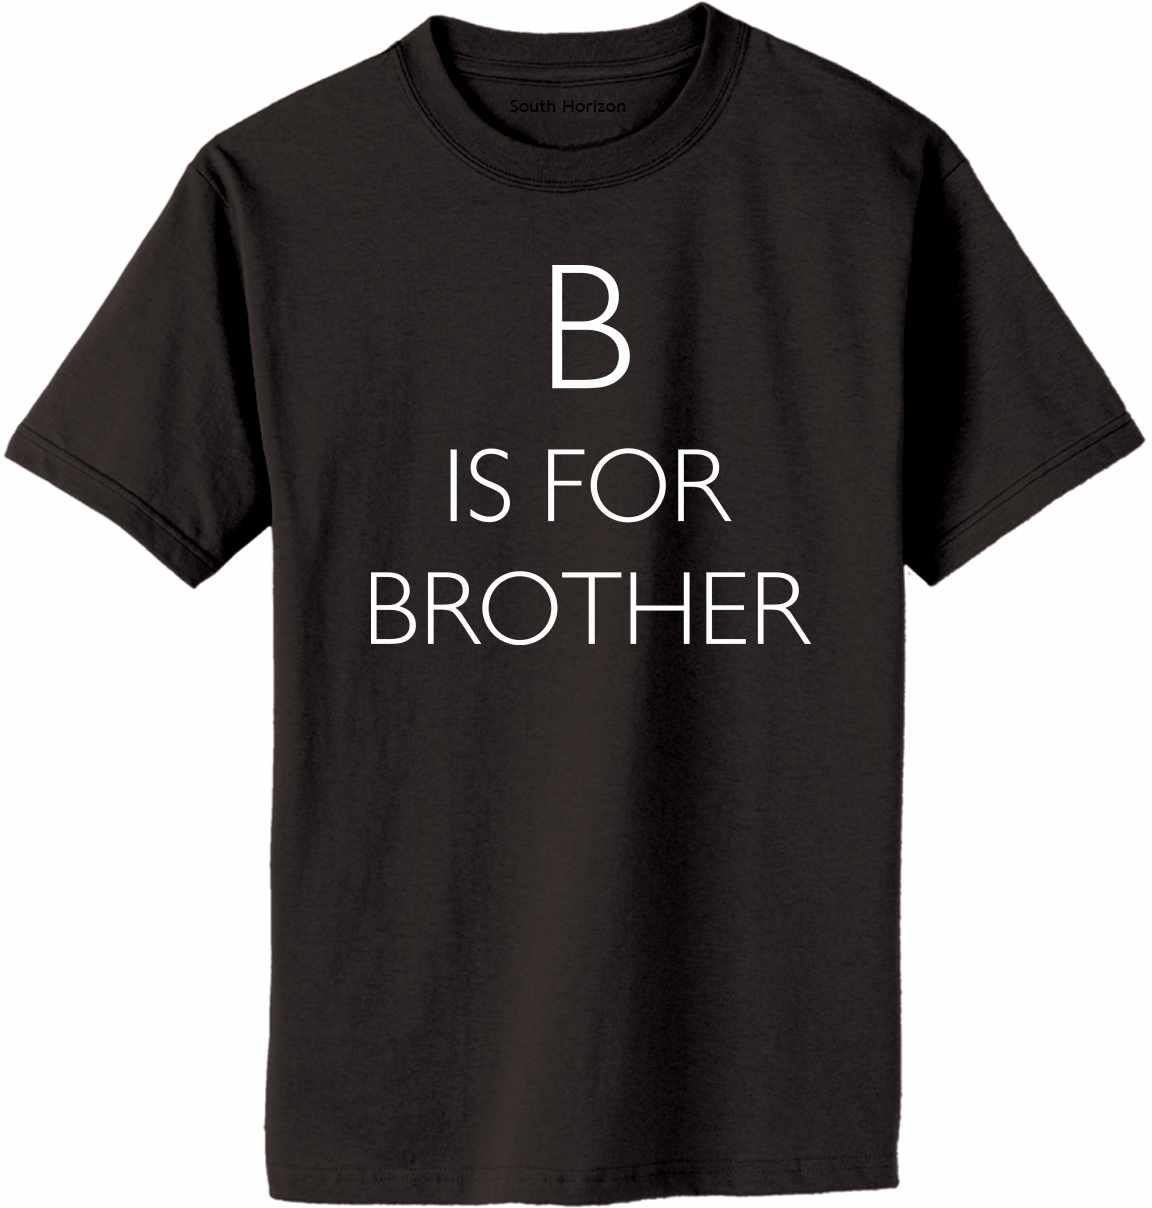 B is for Brother Adult T-Shirt